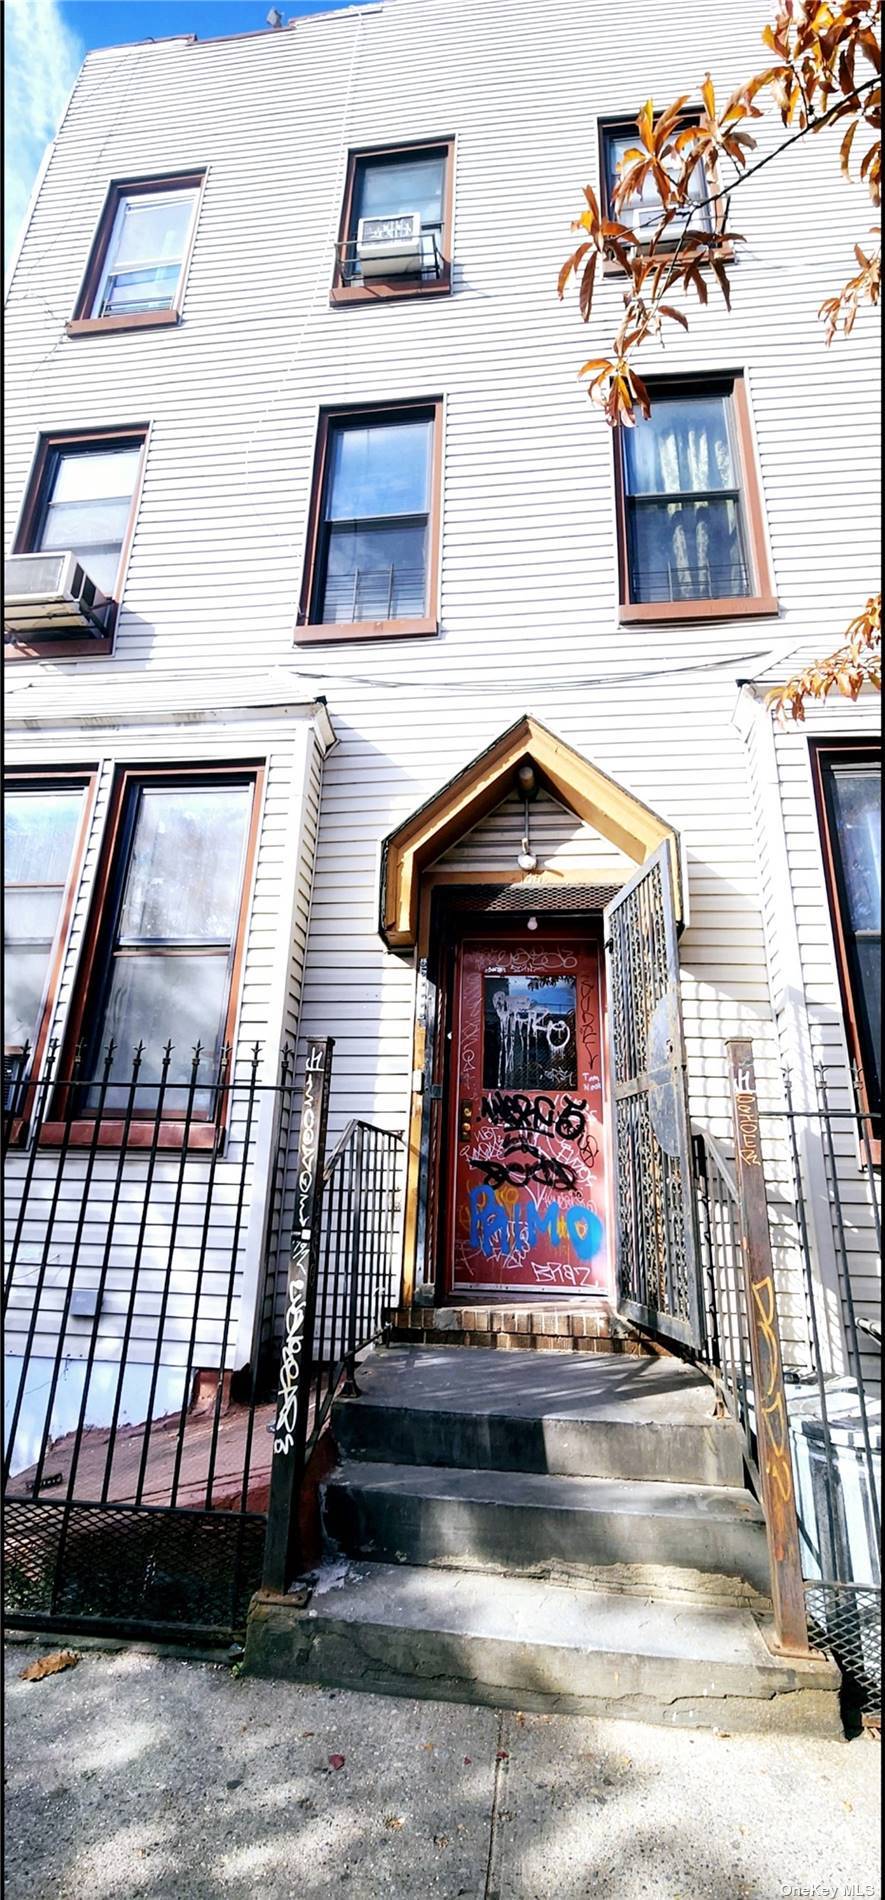 This property located is located in the heart of Bushwick, Brooklyn.